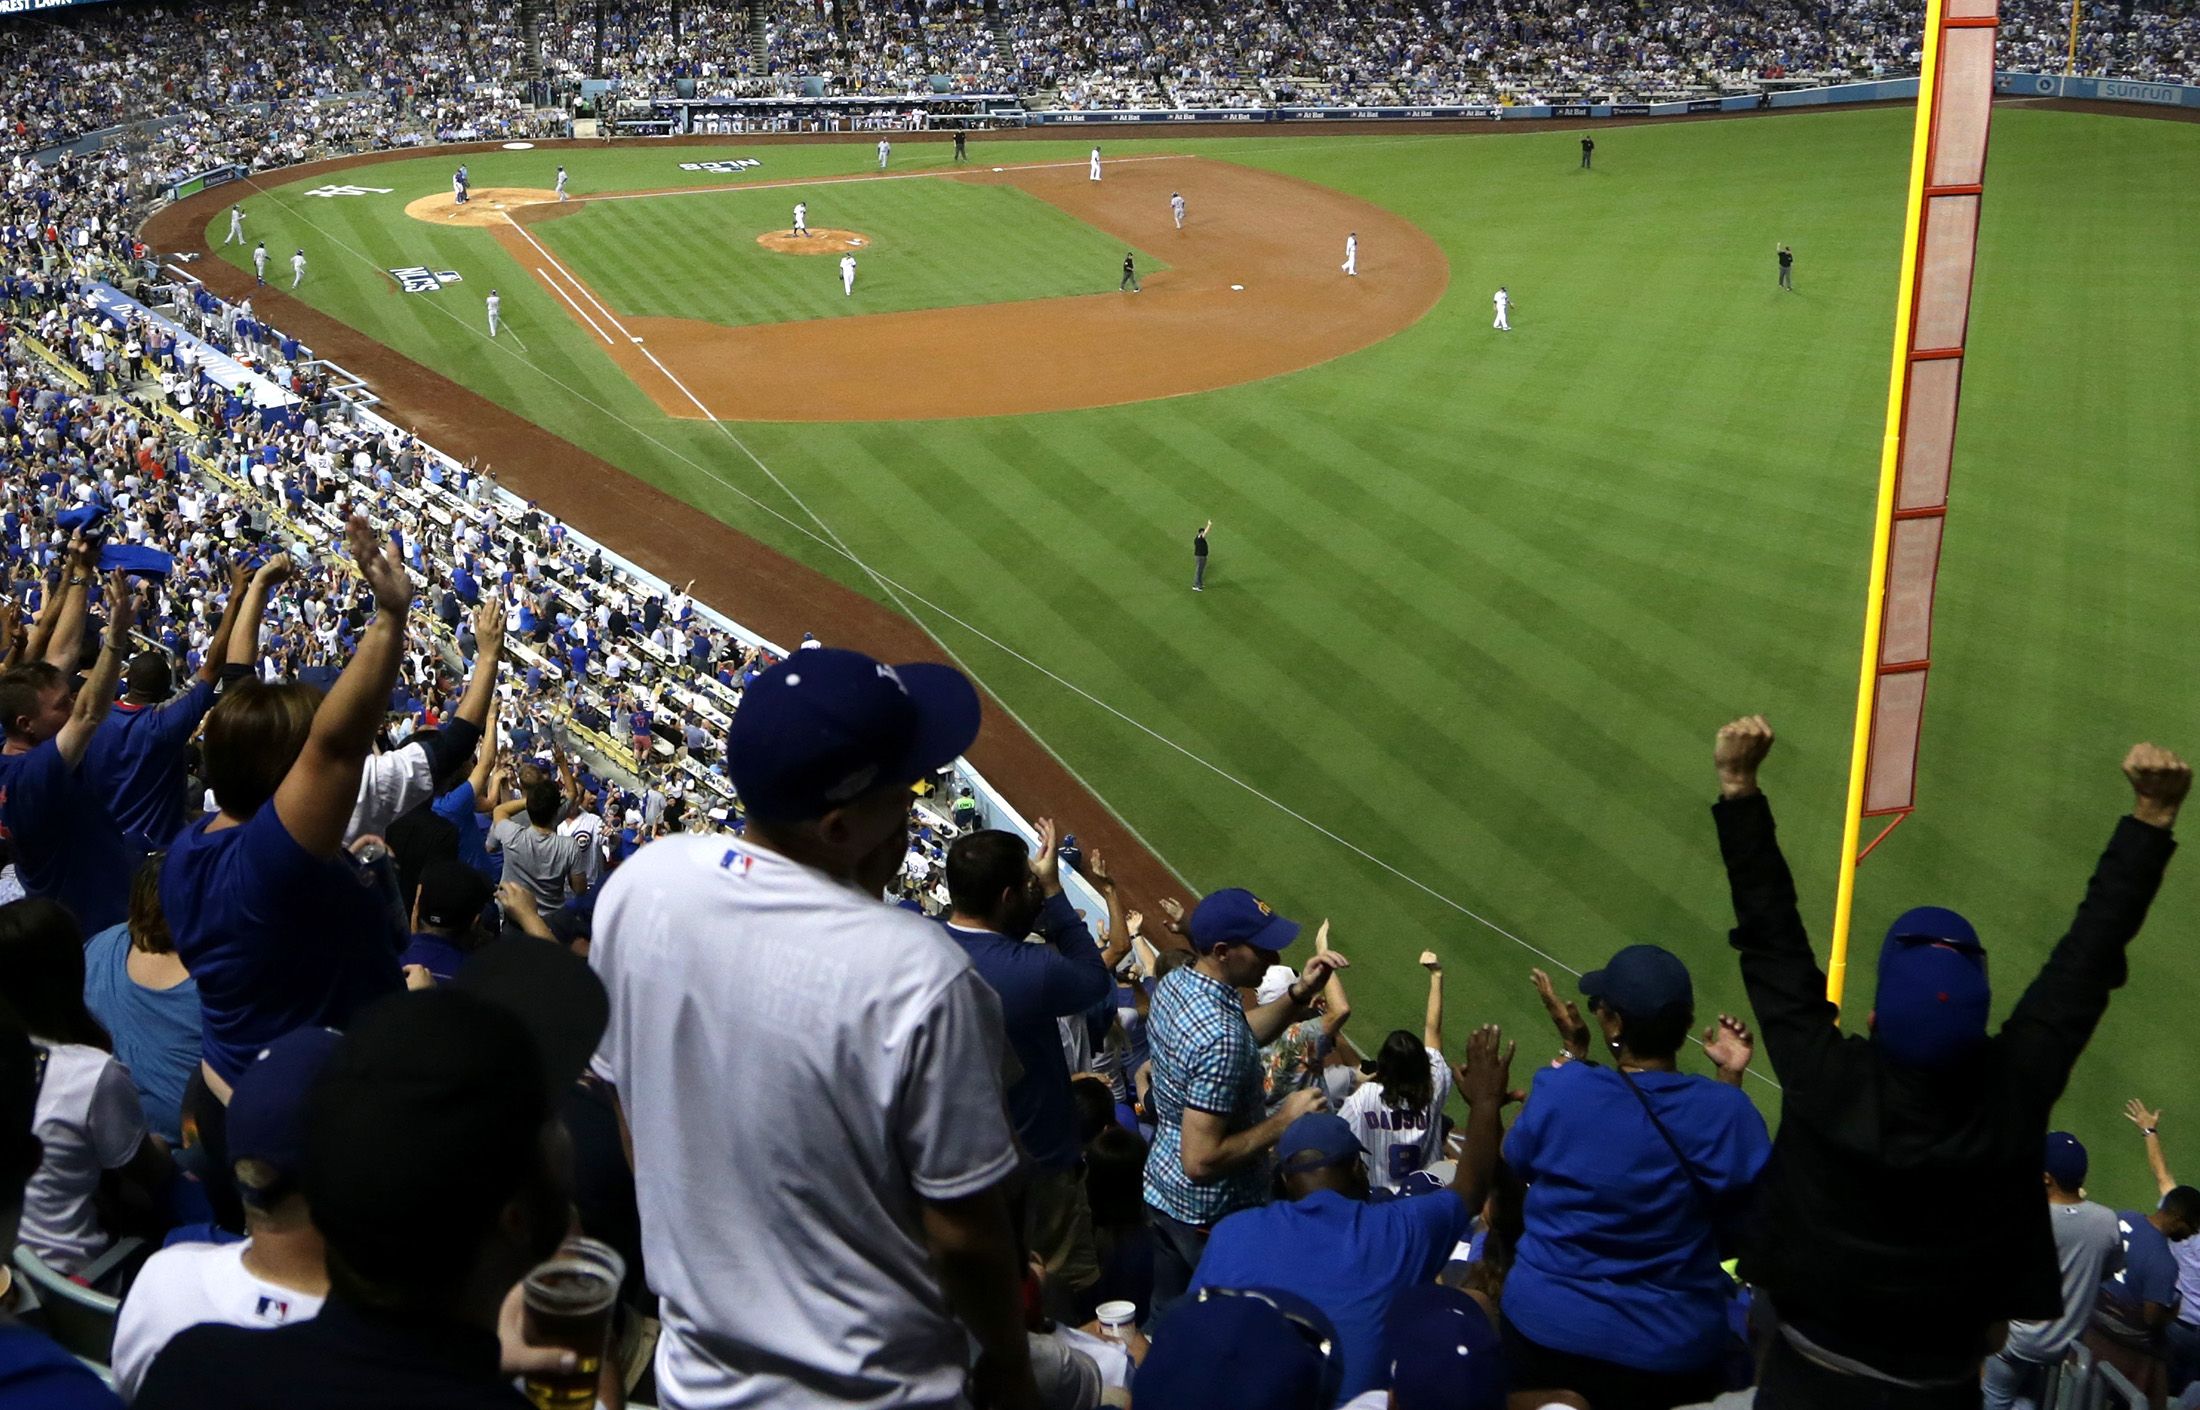 Chicago Cubs fans cheer in the fourth inning against the Los Angeles Dodgers in game four of the National League Championship Series at Dodger Stadium on Oct. 19, 2016 in Los Angeles, California.
